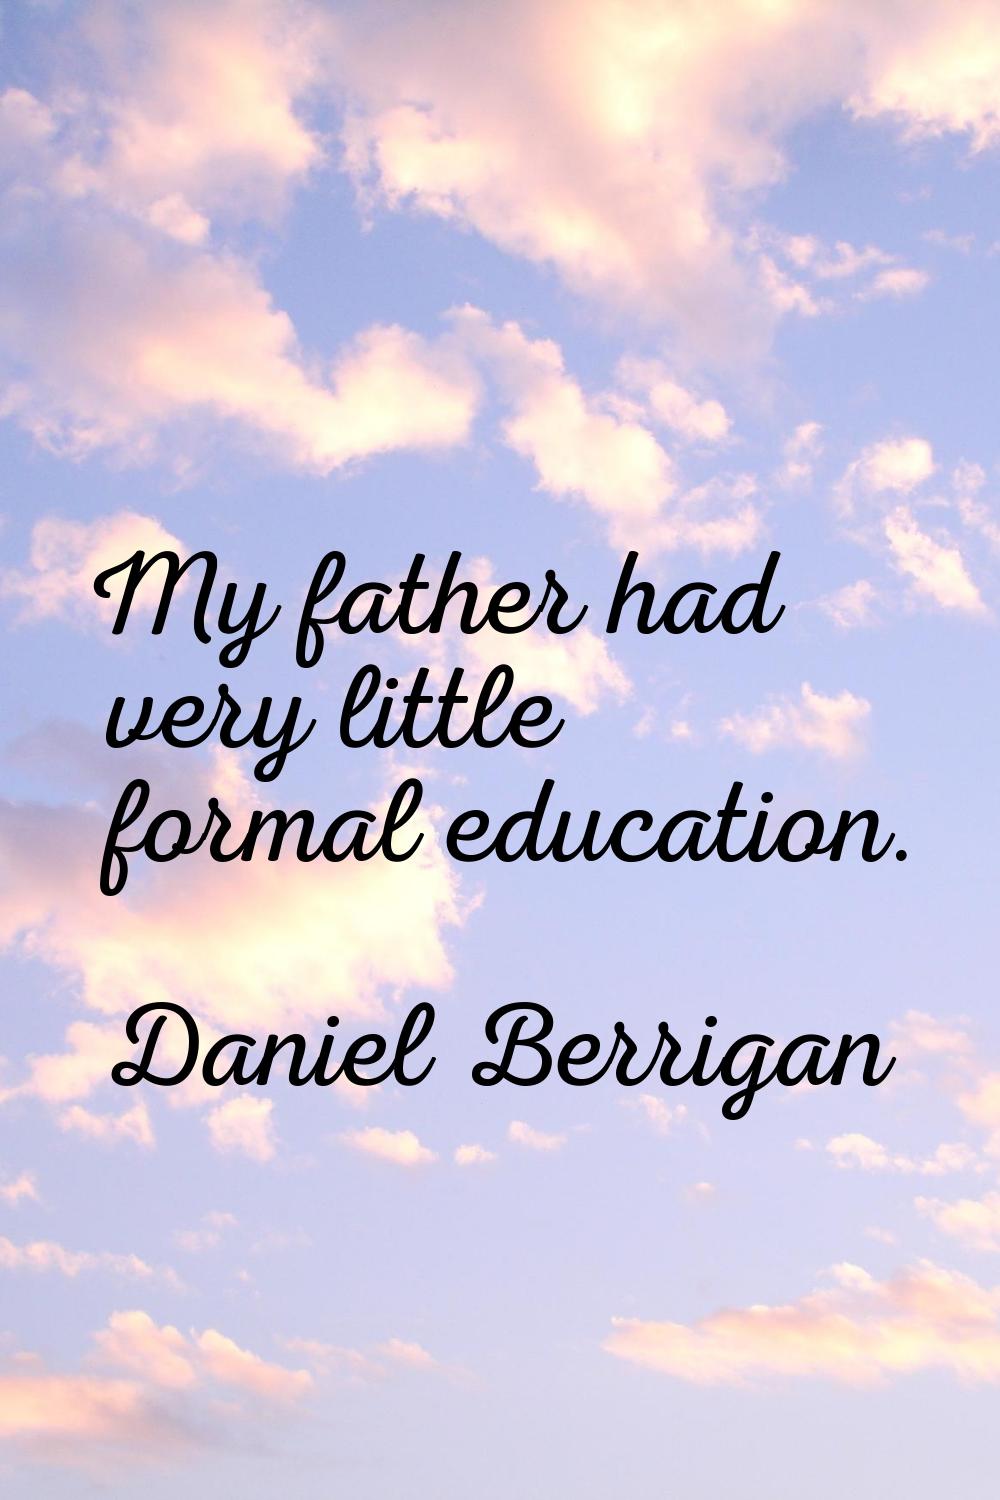 My father had very little formal education.